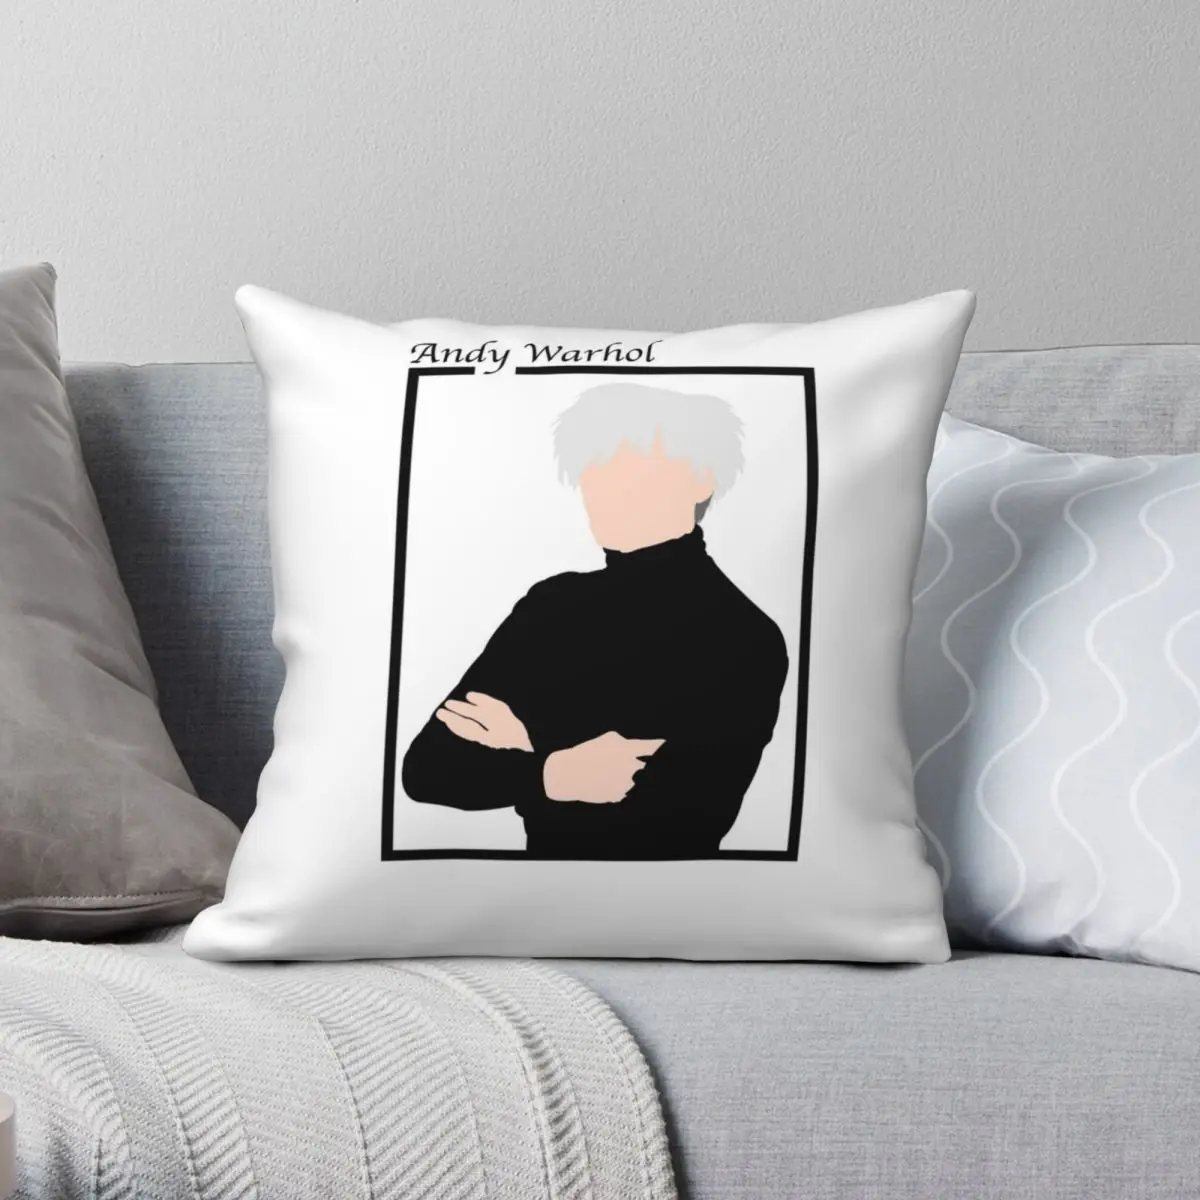 

ANDY WARHOL Pillowcase Polyester Linen Velvet Printed Zip Decorative Pillow Case Home Cushion Cover